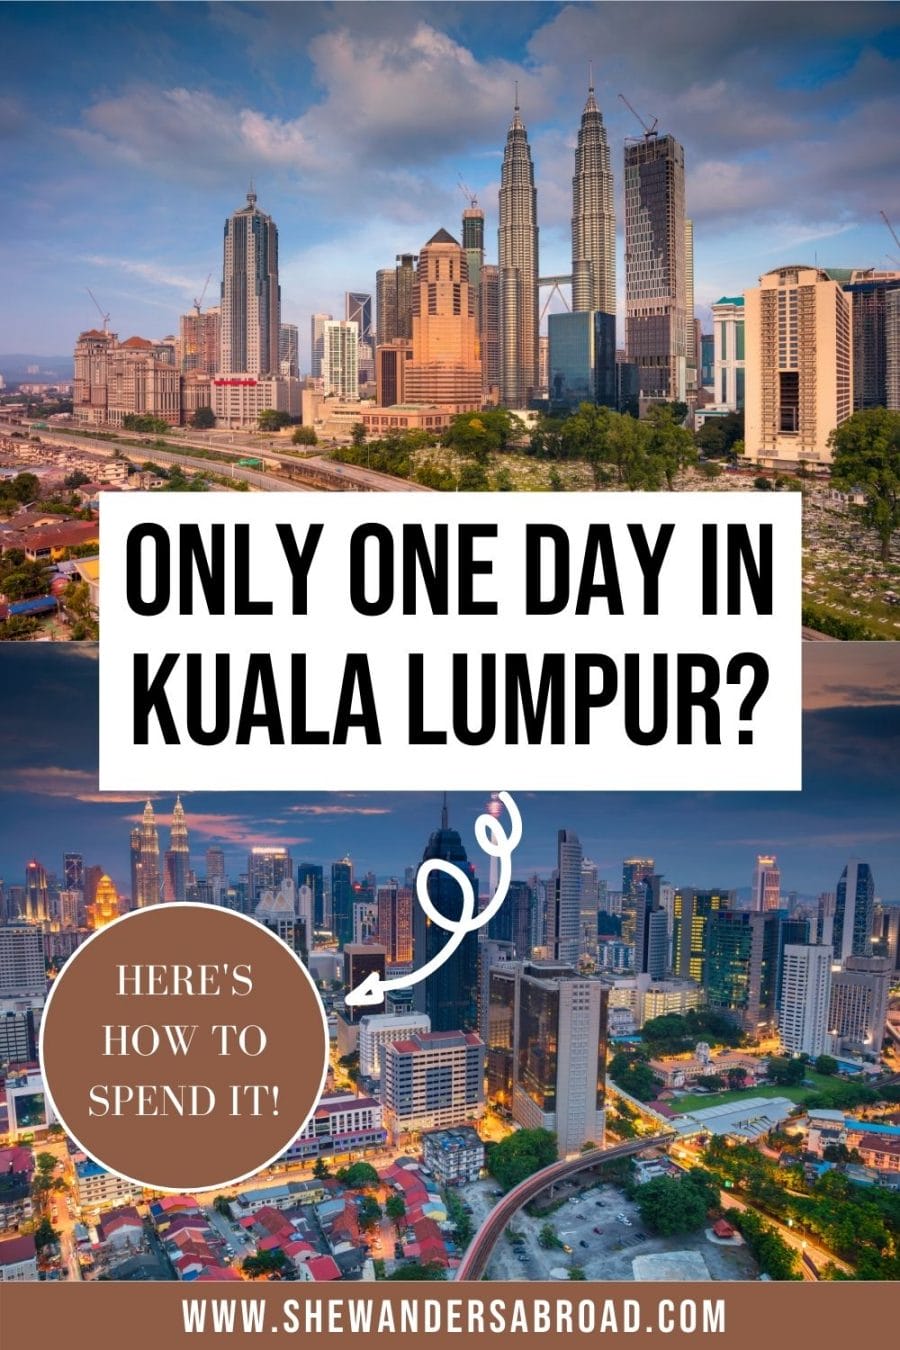 How to See the Best of Kuala Lumpur in One Day